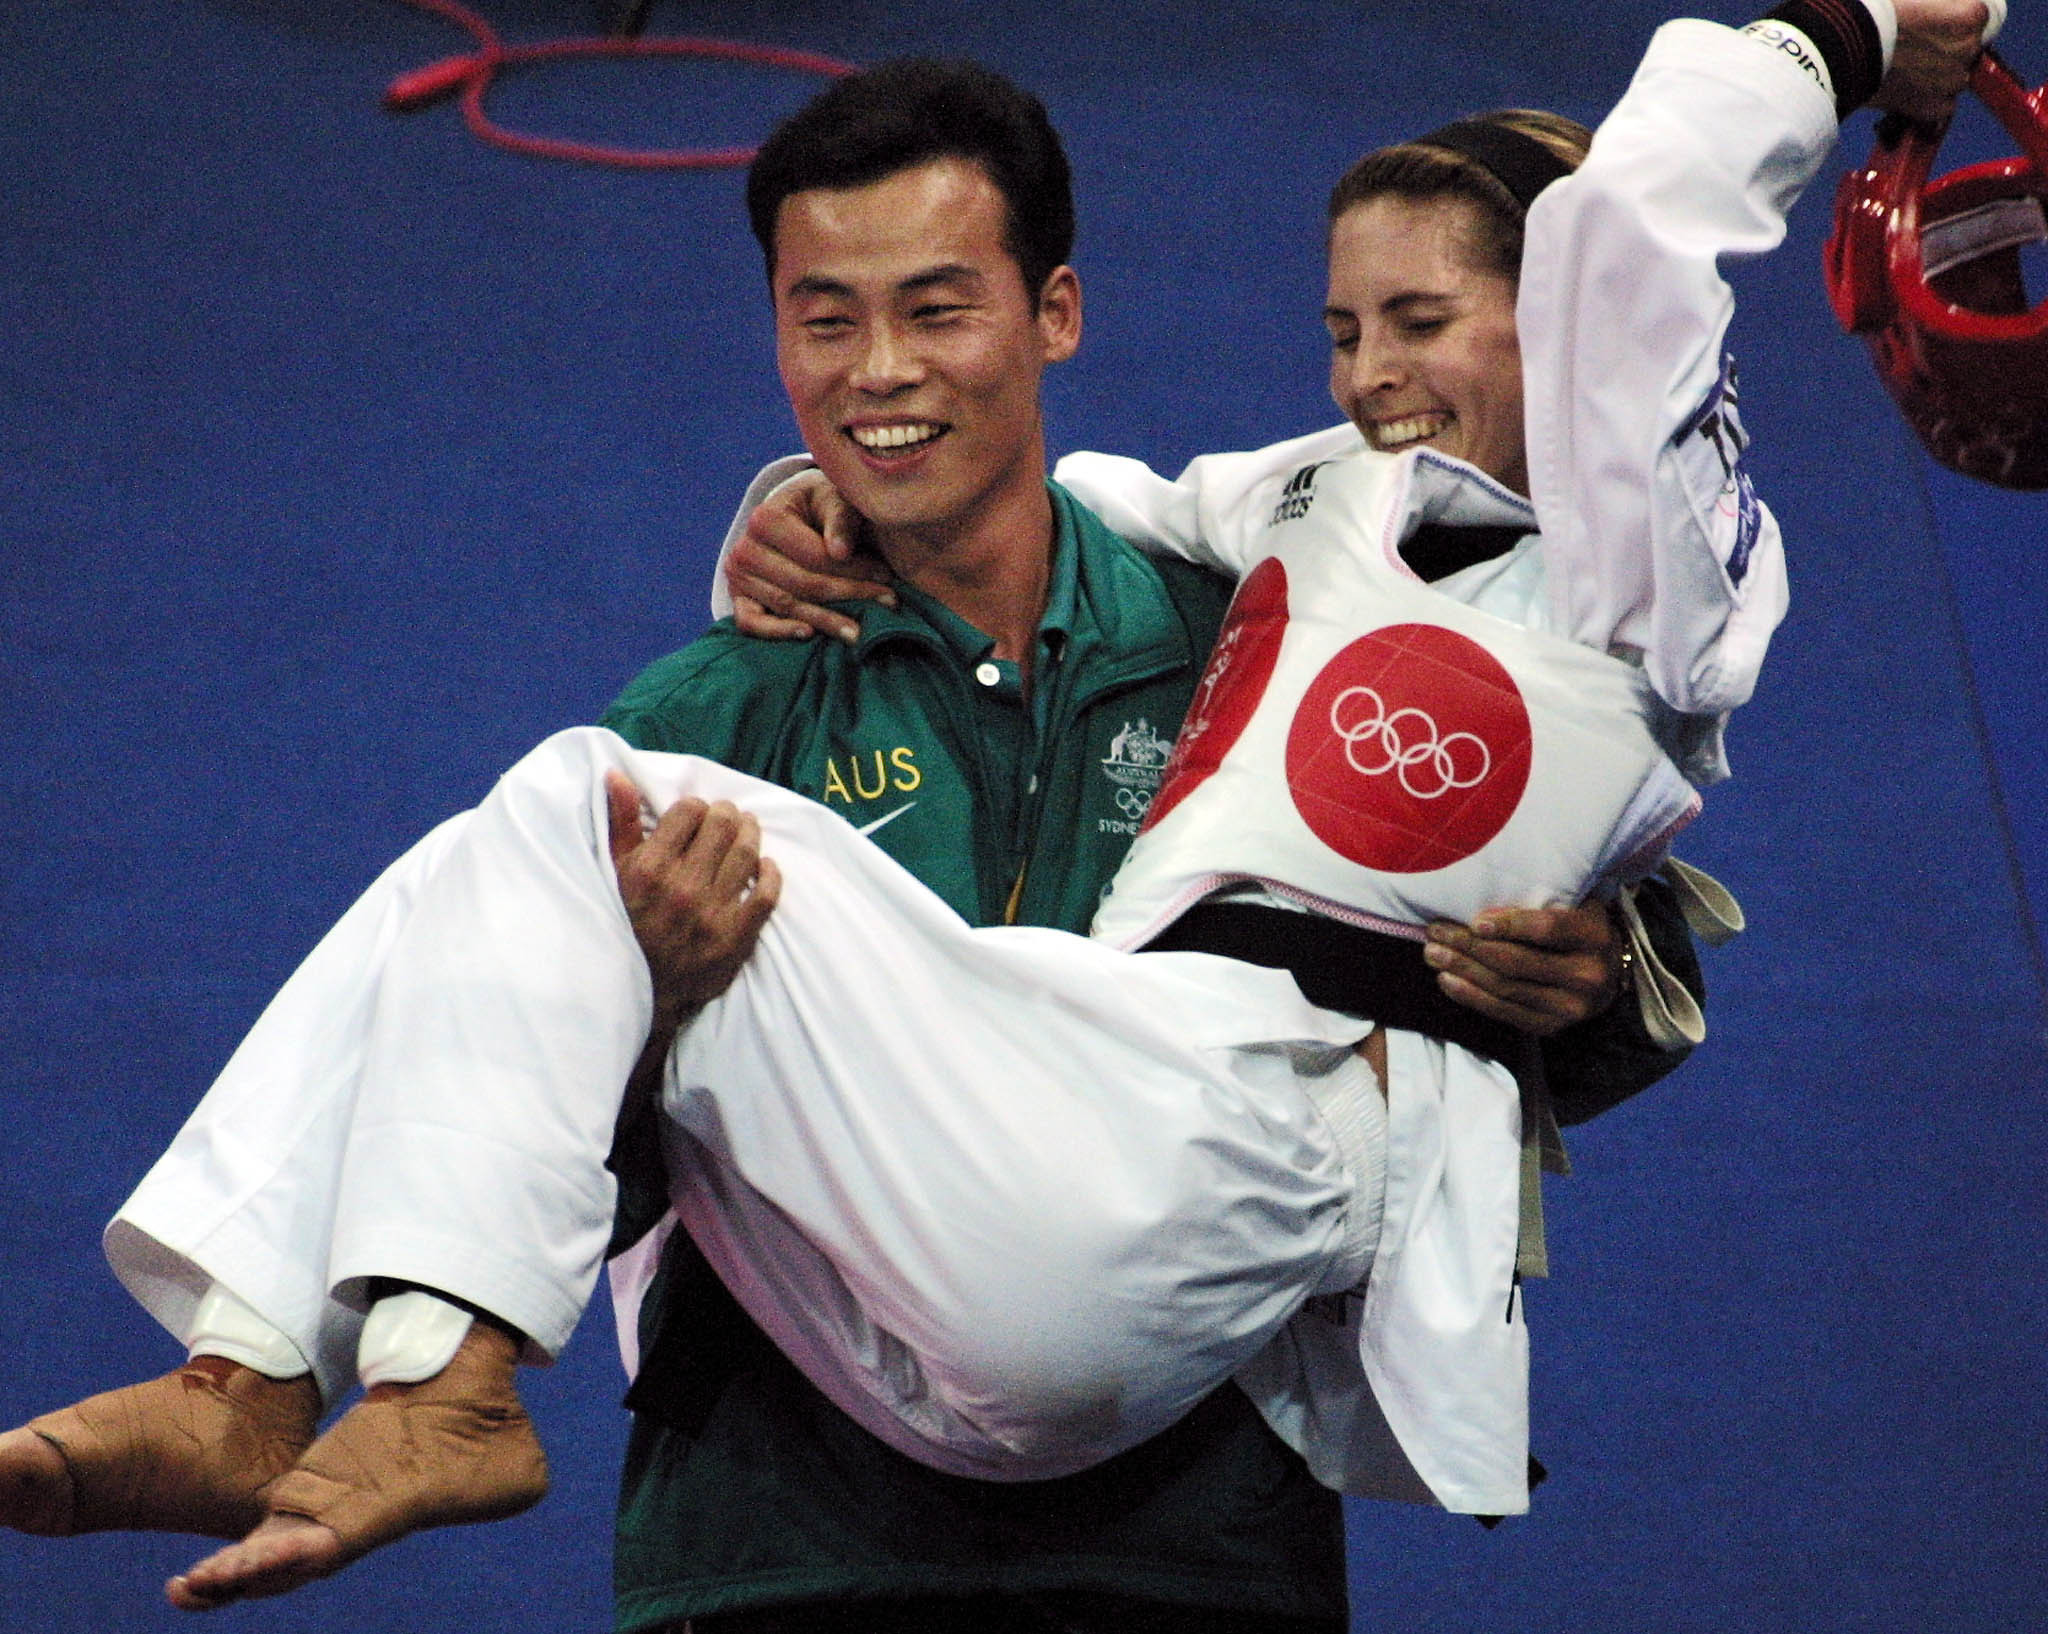 Lauren Burns was the last Australian to win gold in taekwondo following her success at Sydney 2000 ©Getty Images